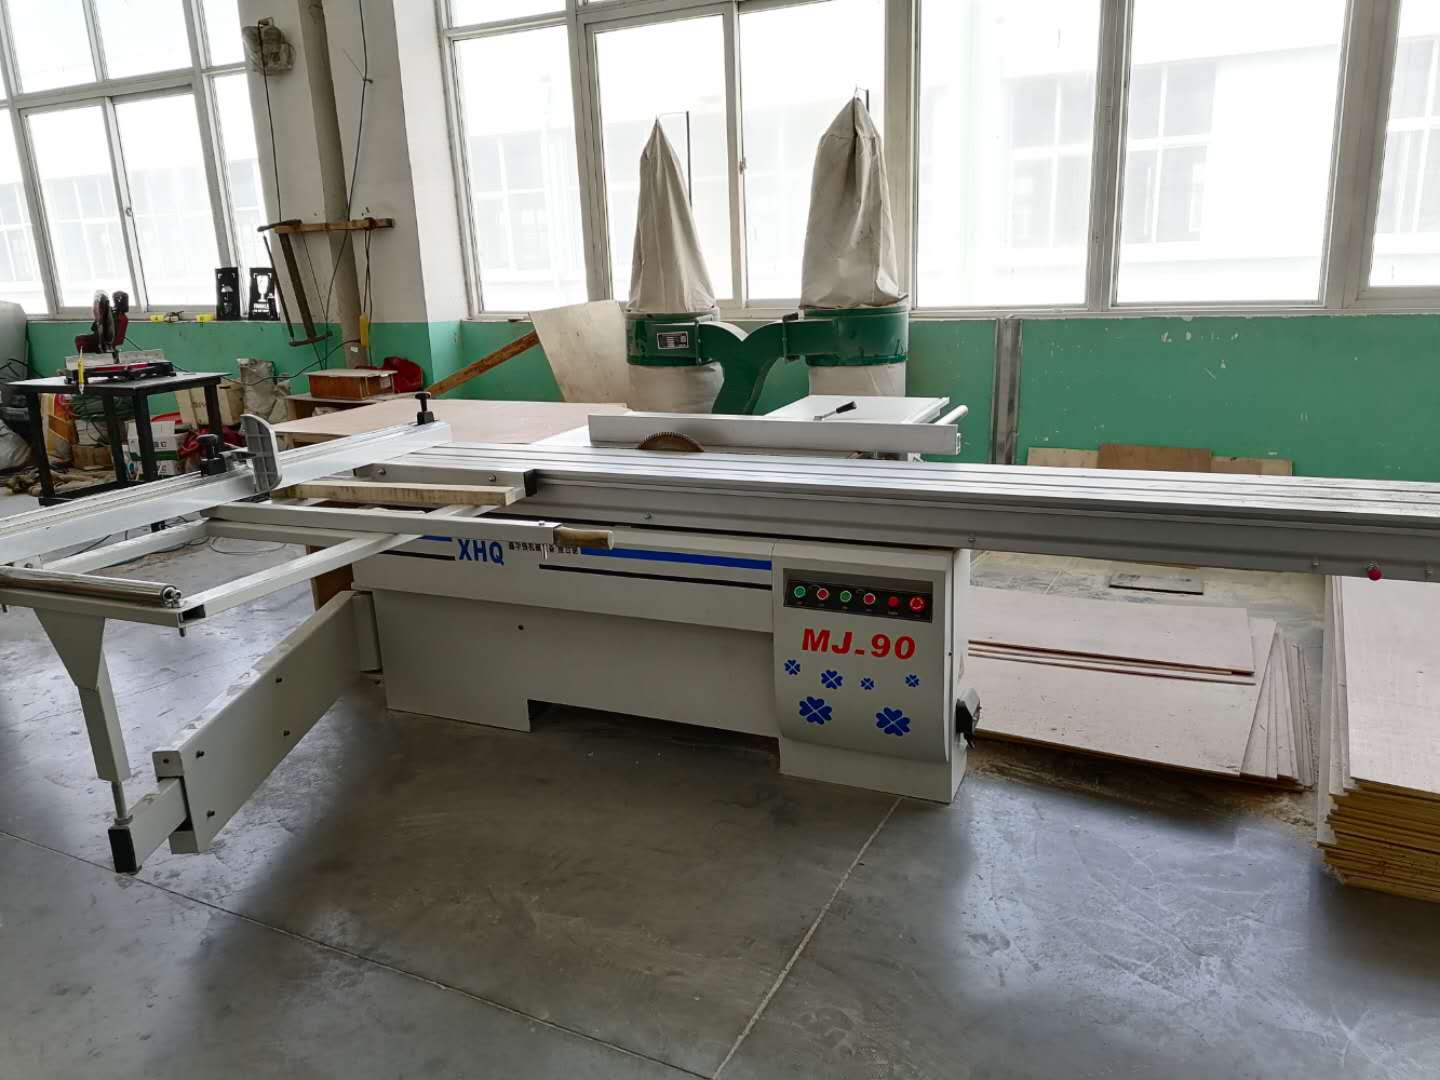 Chike factory added wood cutting machine tools to improve the efficiency of wooden box packaging production